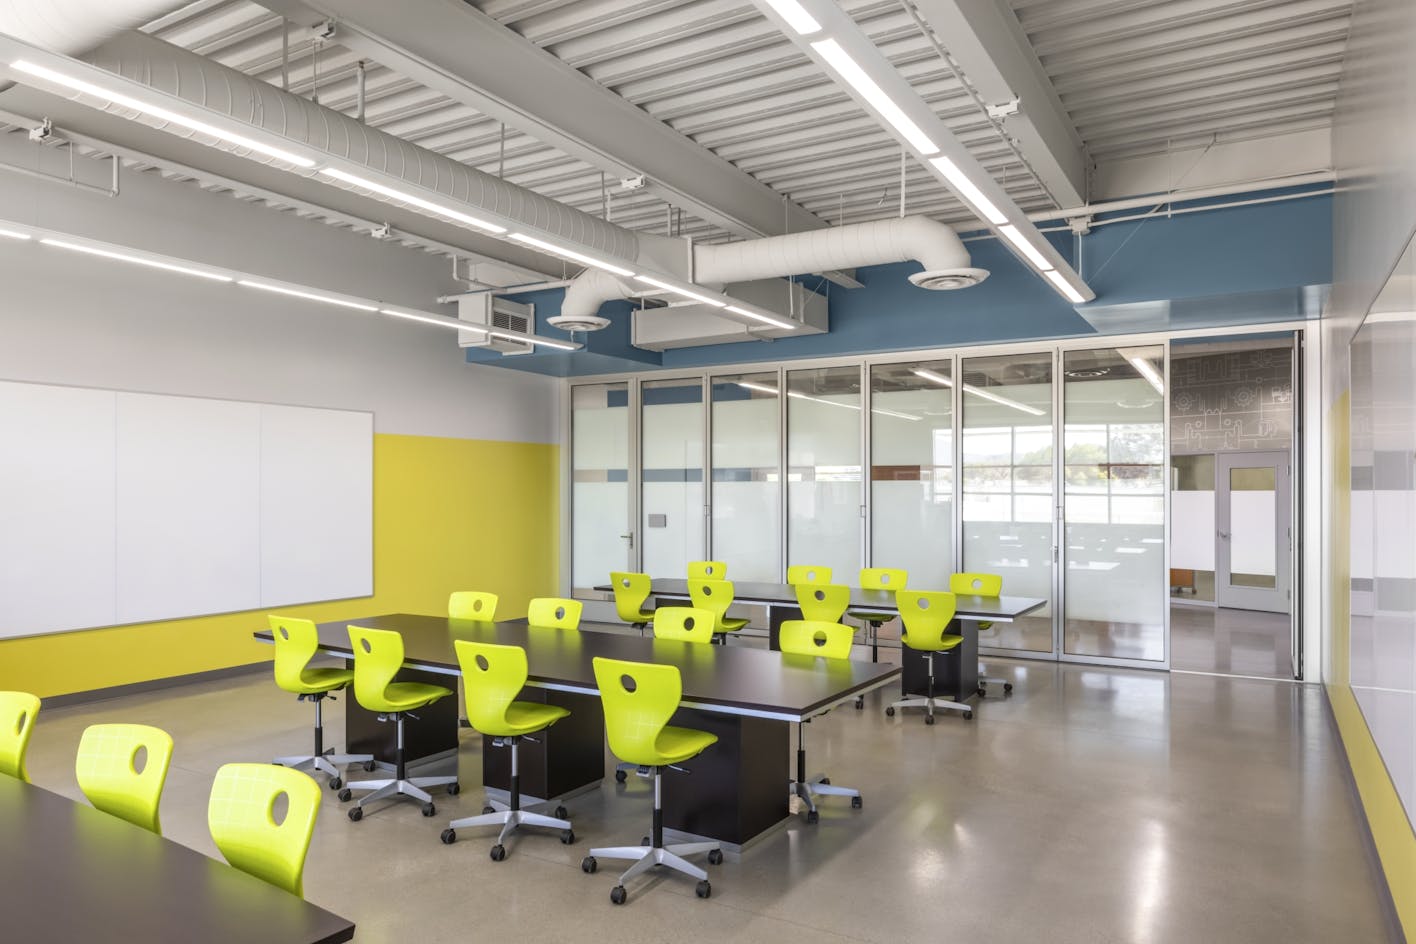 flexible learning space with NanaWall Generation 4 system